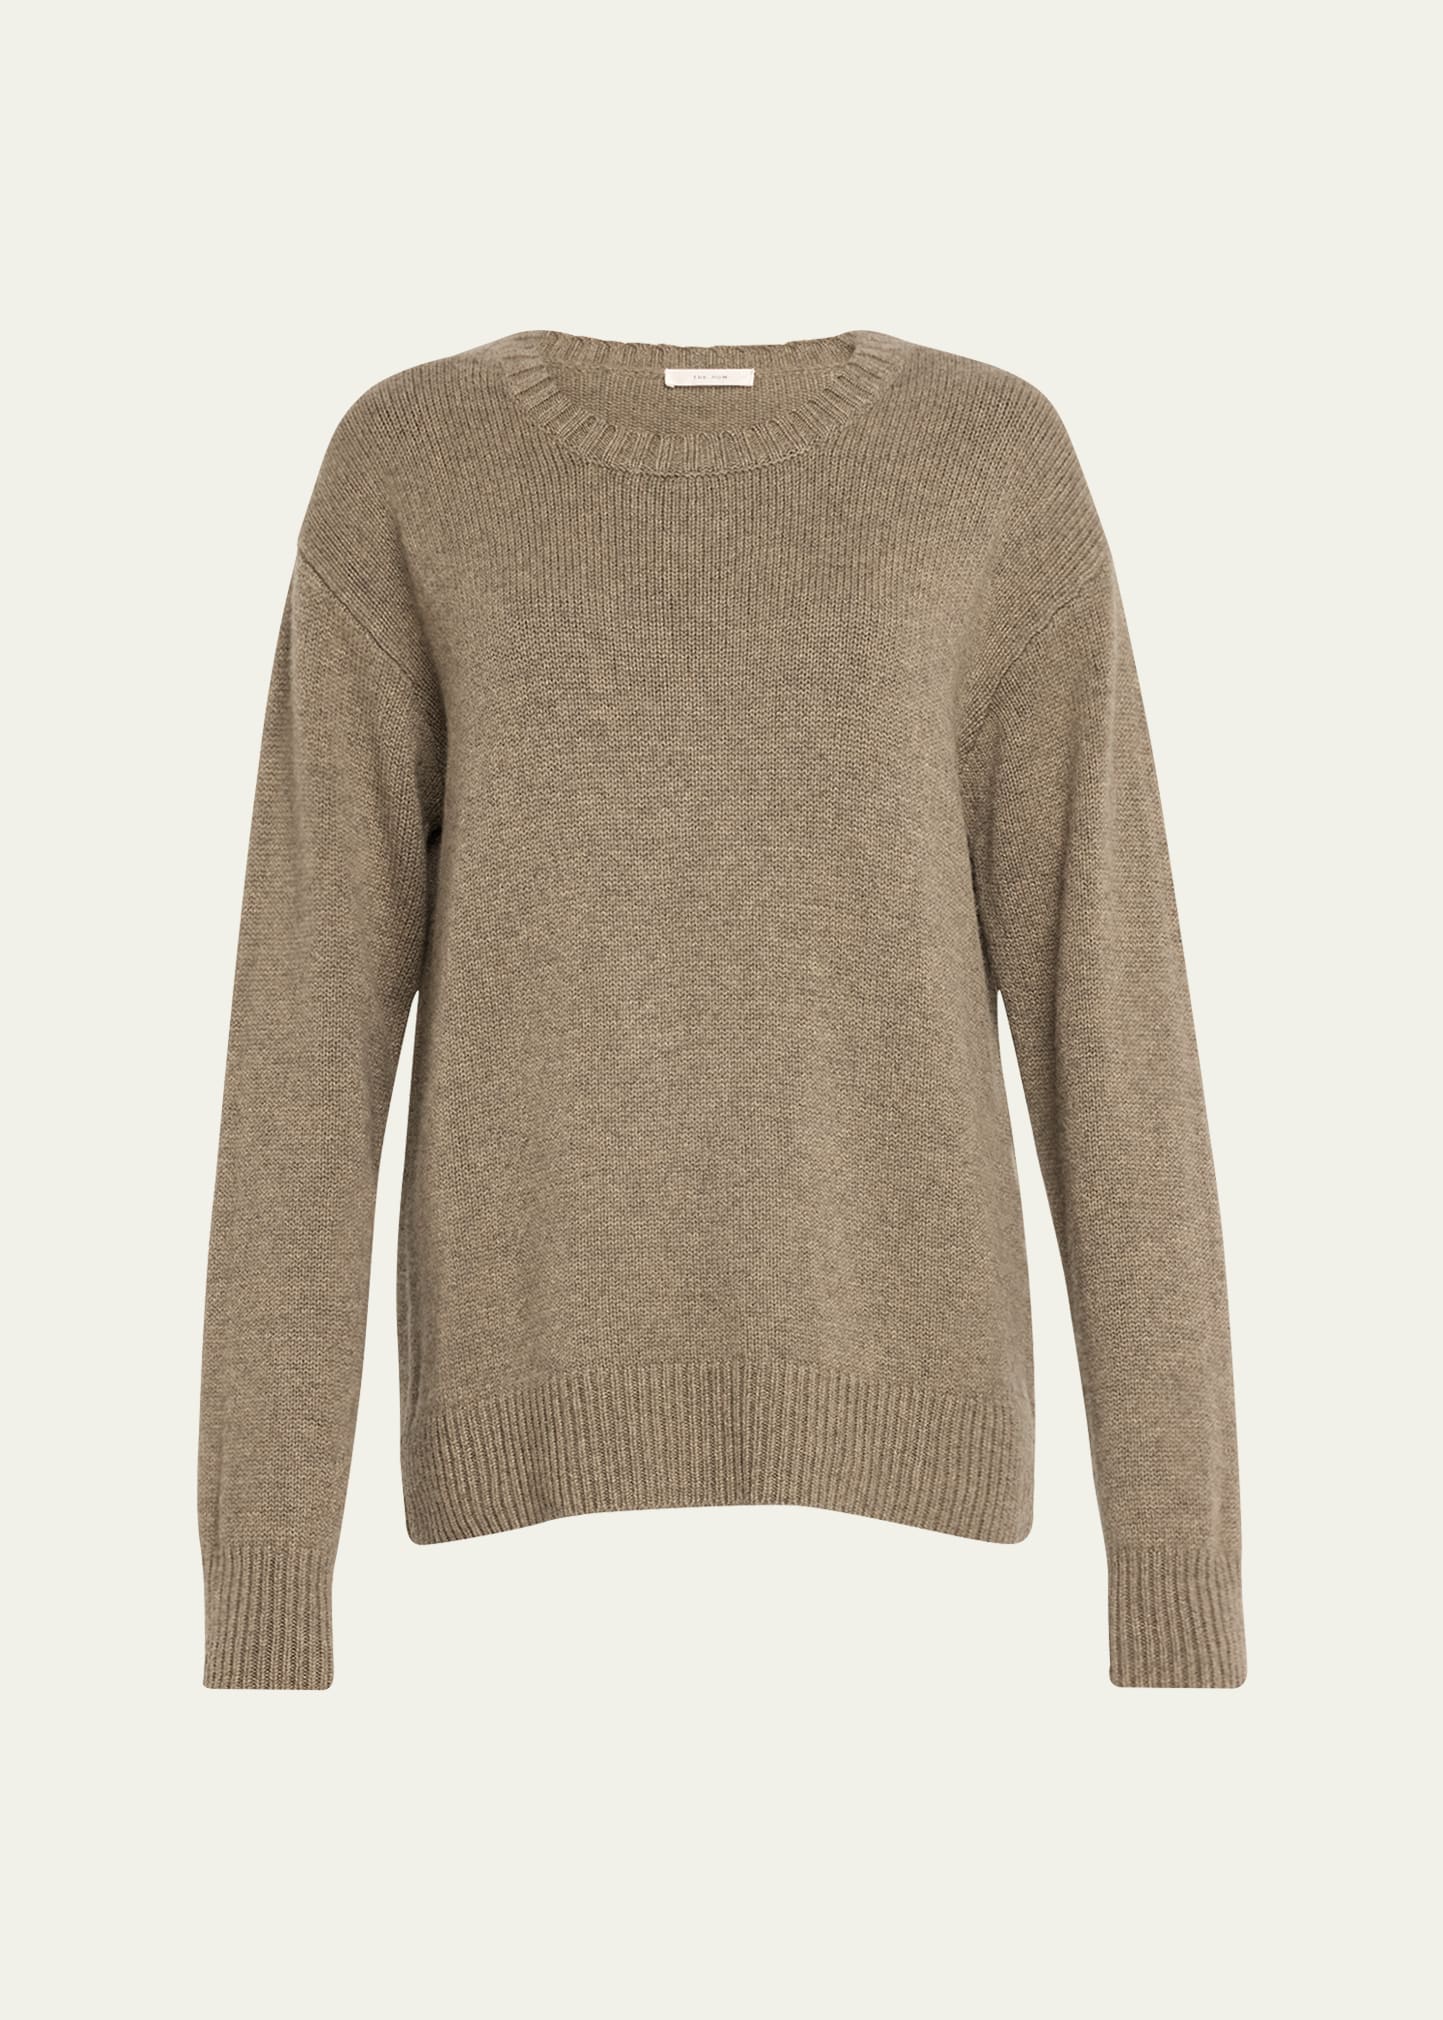 Shop The Row Fiji Cashmere Knit Sweater In Light Grey Melang